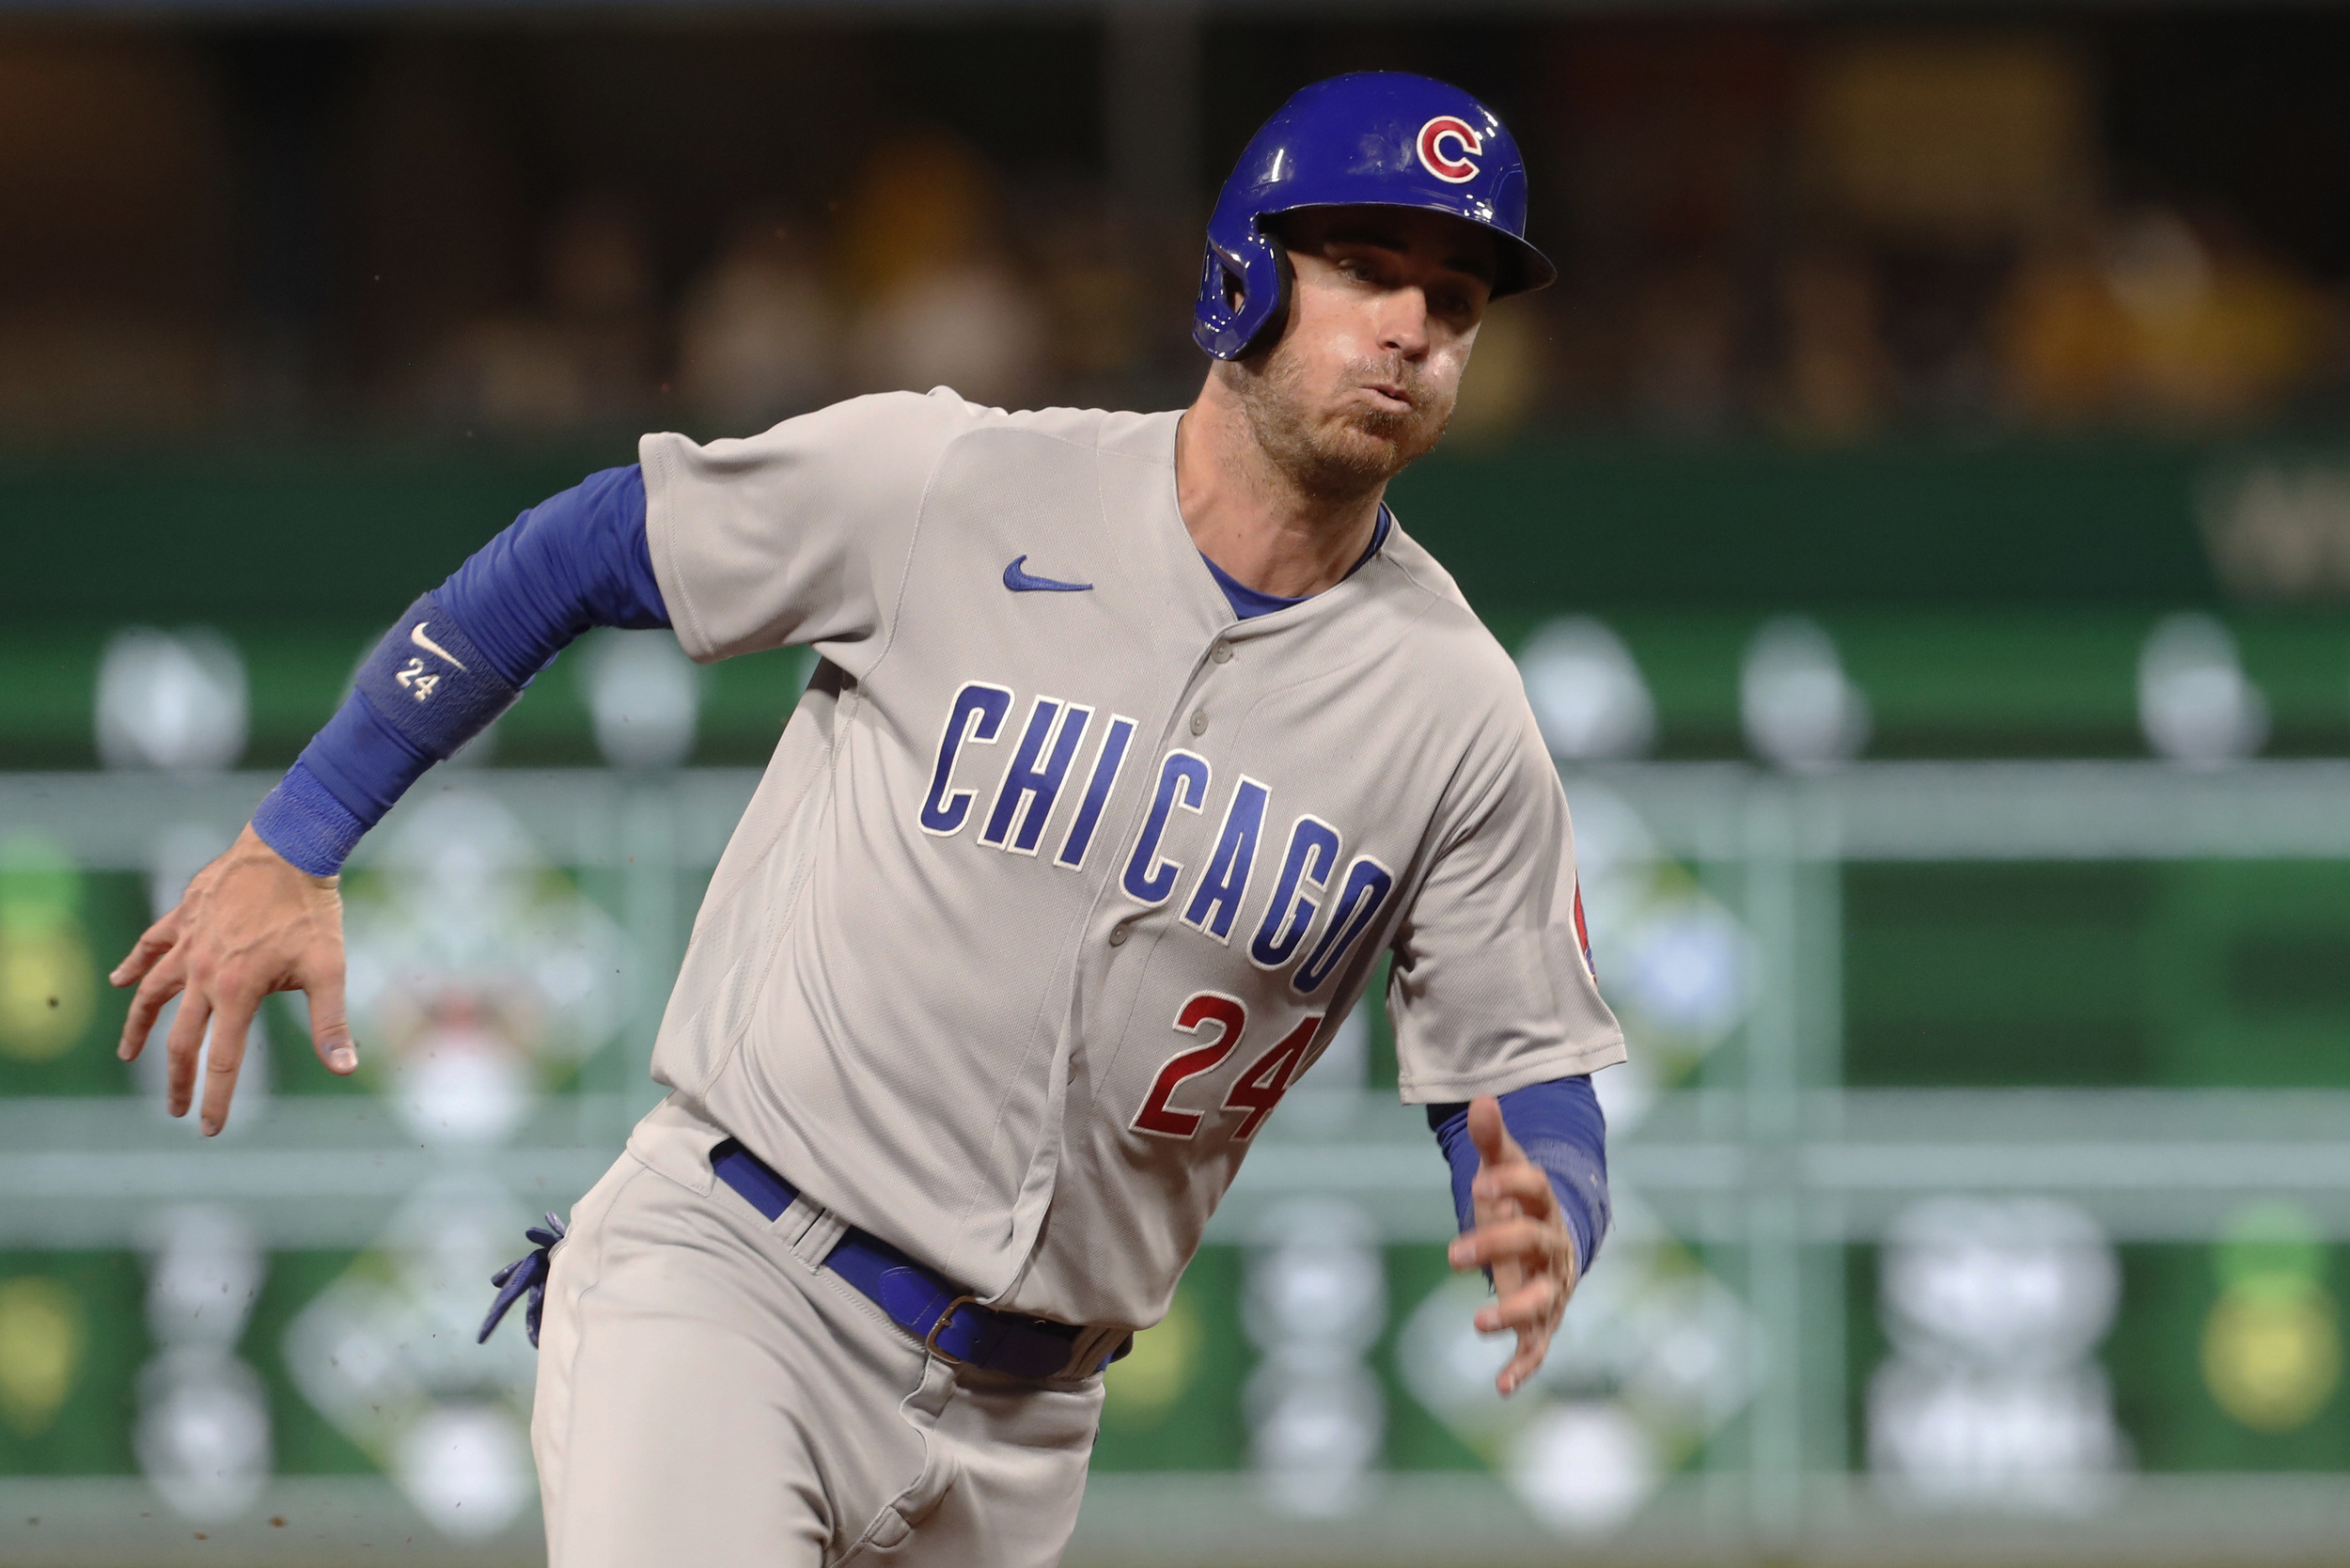 Drew Smyly will replace Marcus Stroman in Cubs' rotation - Chicago Sun-Times